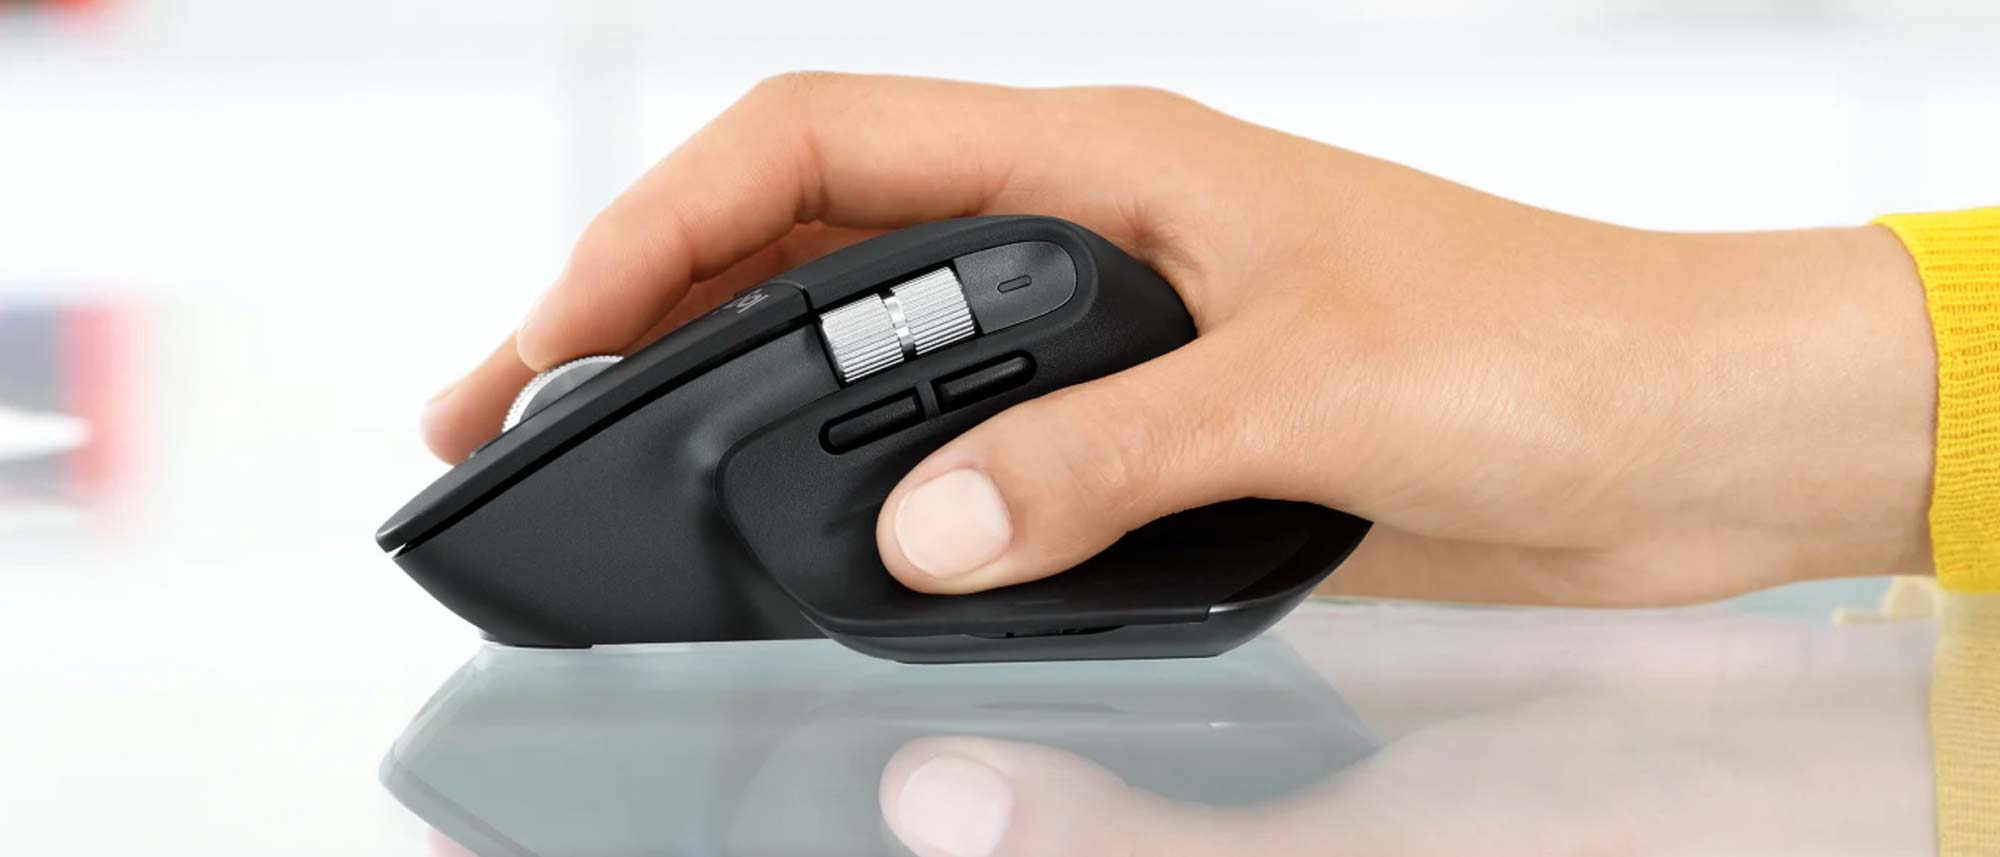 adapt wireless mouse to tab when is for windows or mac